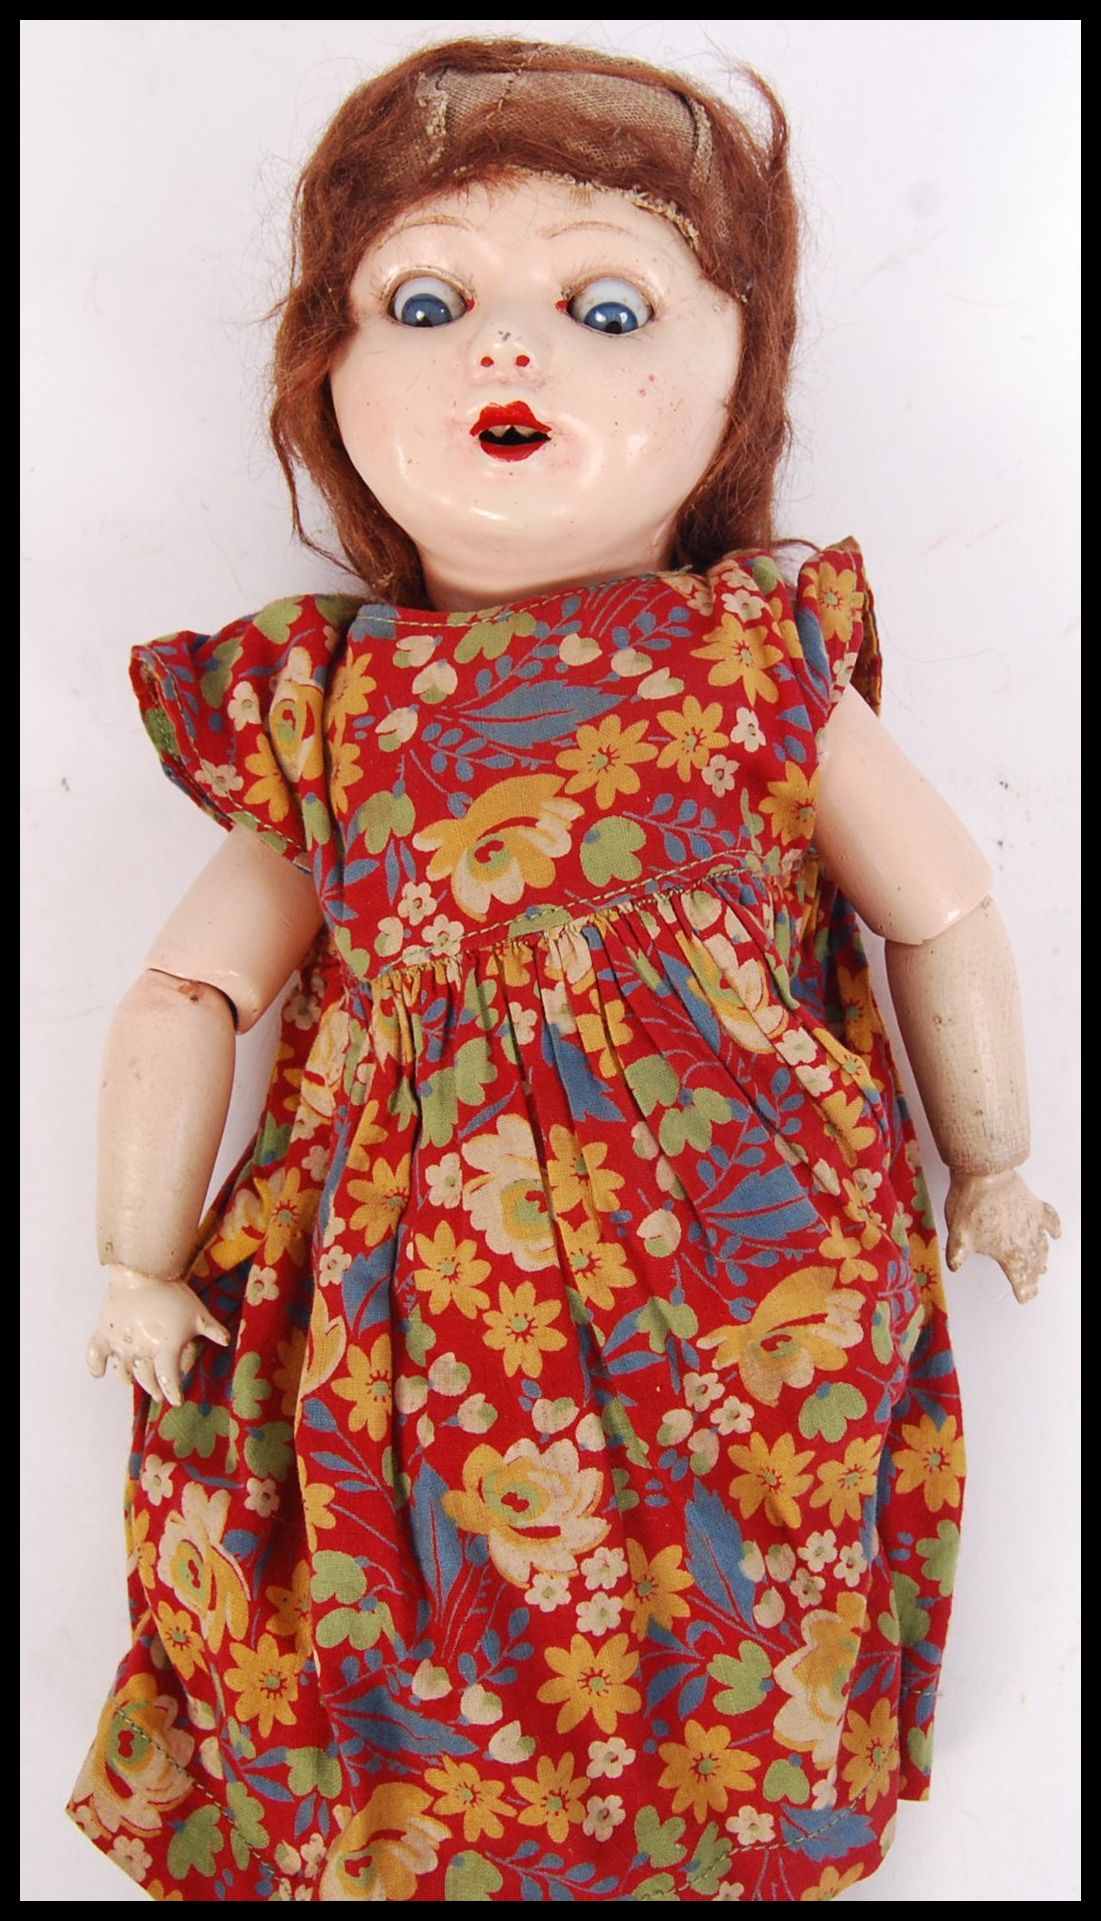 ANTIQUE EARLY 20TH CENTURY COMPOSITION DOLL - Image 2 of 4